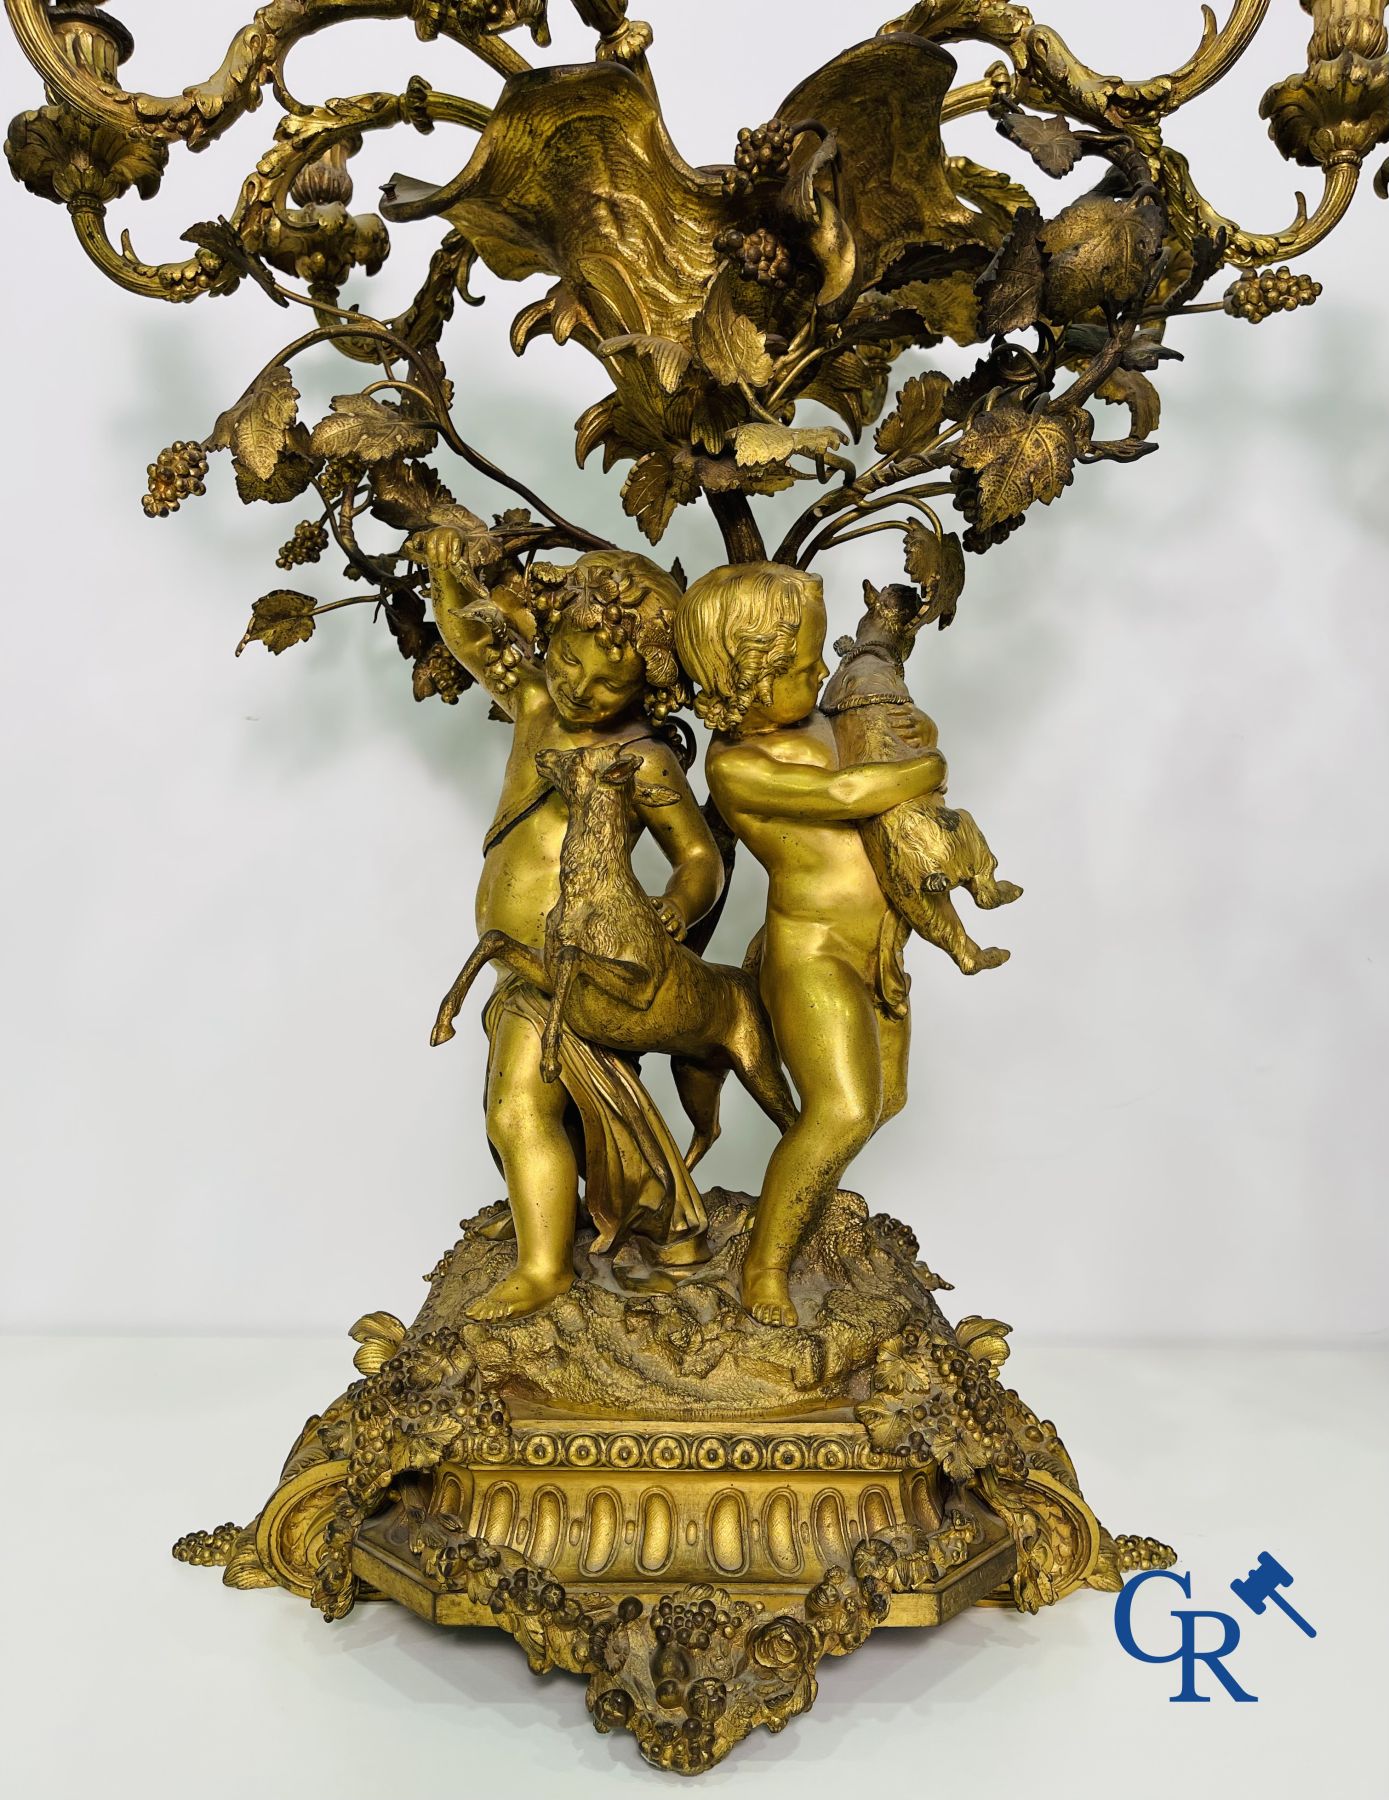 A pair of imposing bronze candlesticks with putti in LXVI style. Napoleon III period. - Image 12 of 32